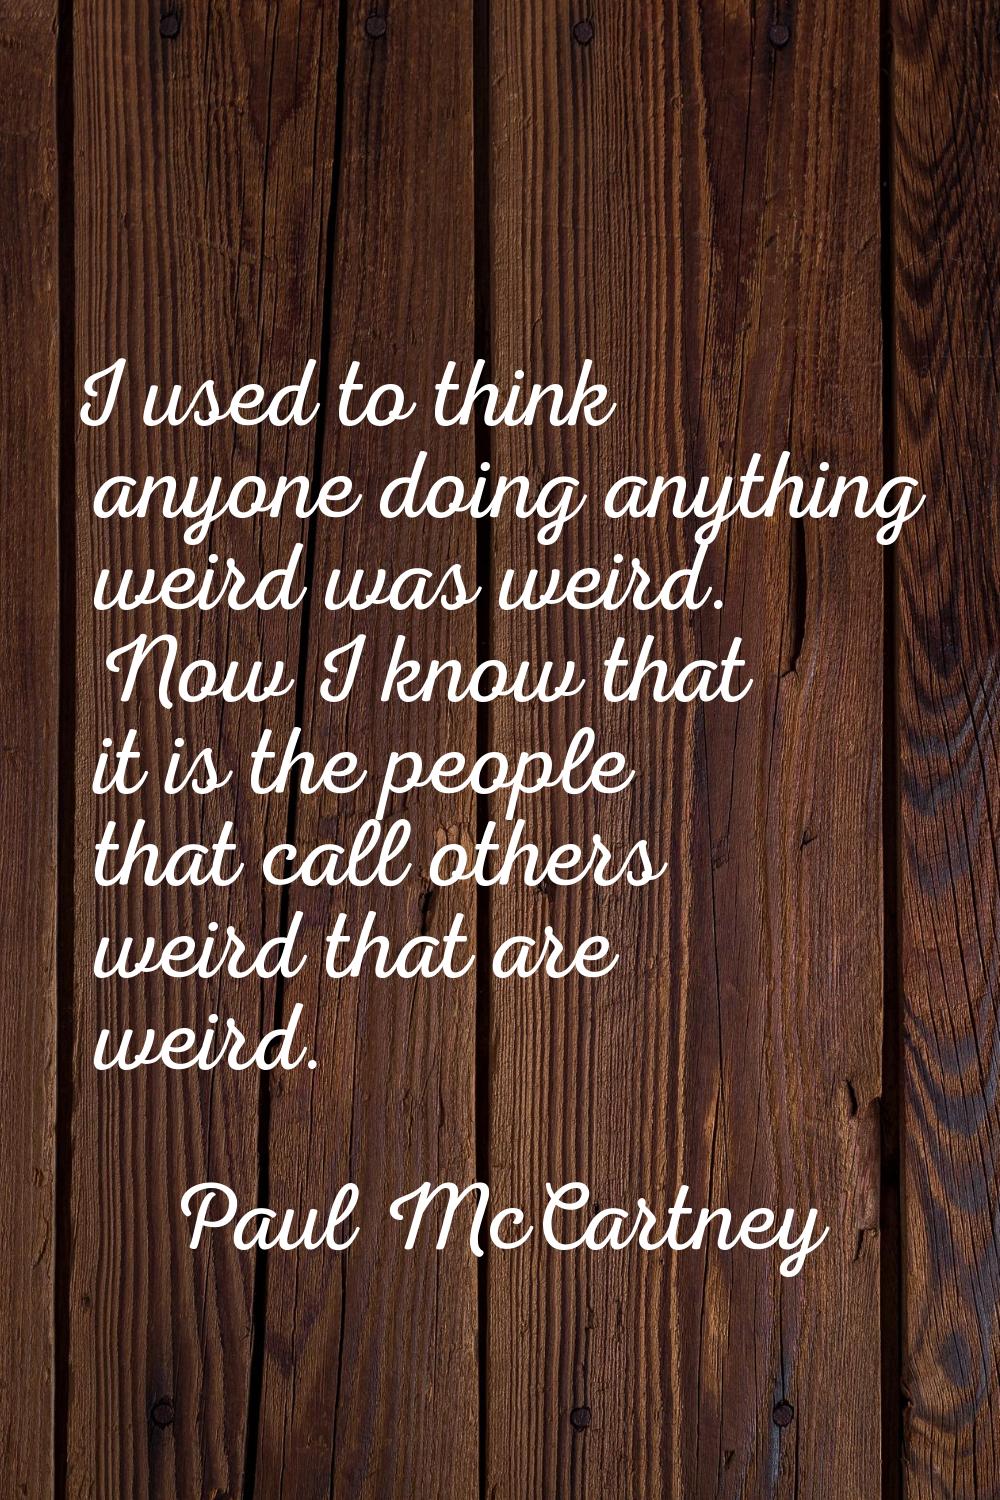 I used to think anyone doing anything weird was weird. Now I know that it is the people that call o